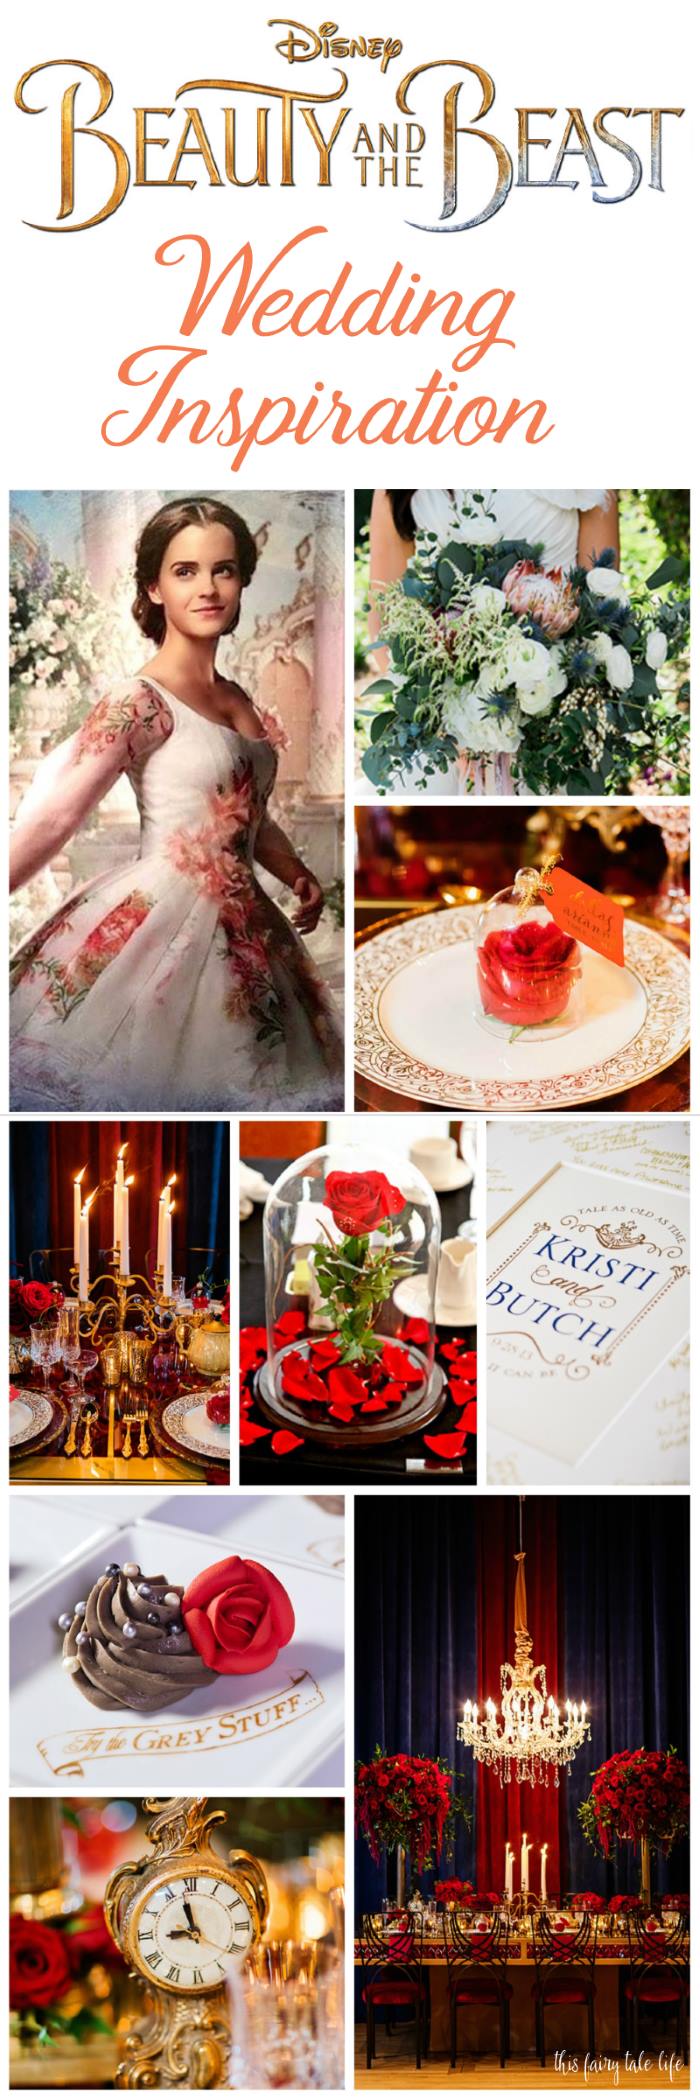 Live-Action BEAUTY AND THE BEAST Wedding Inspiration